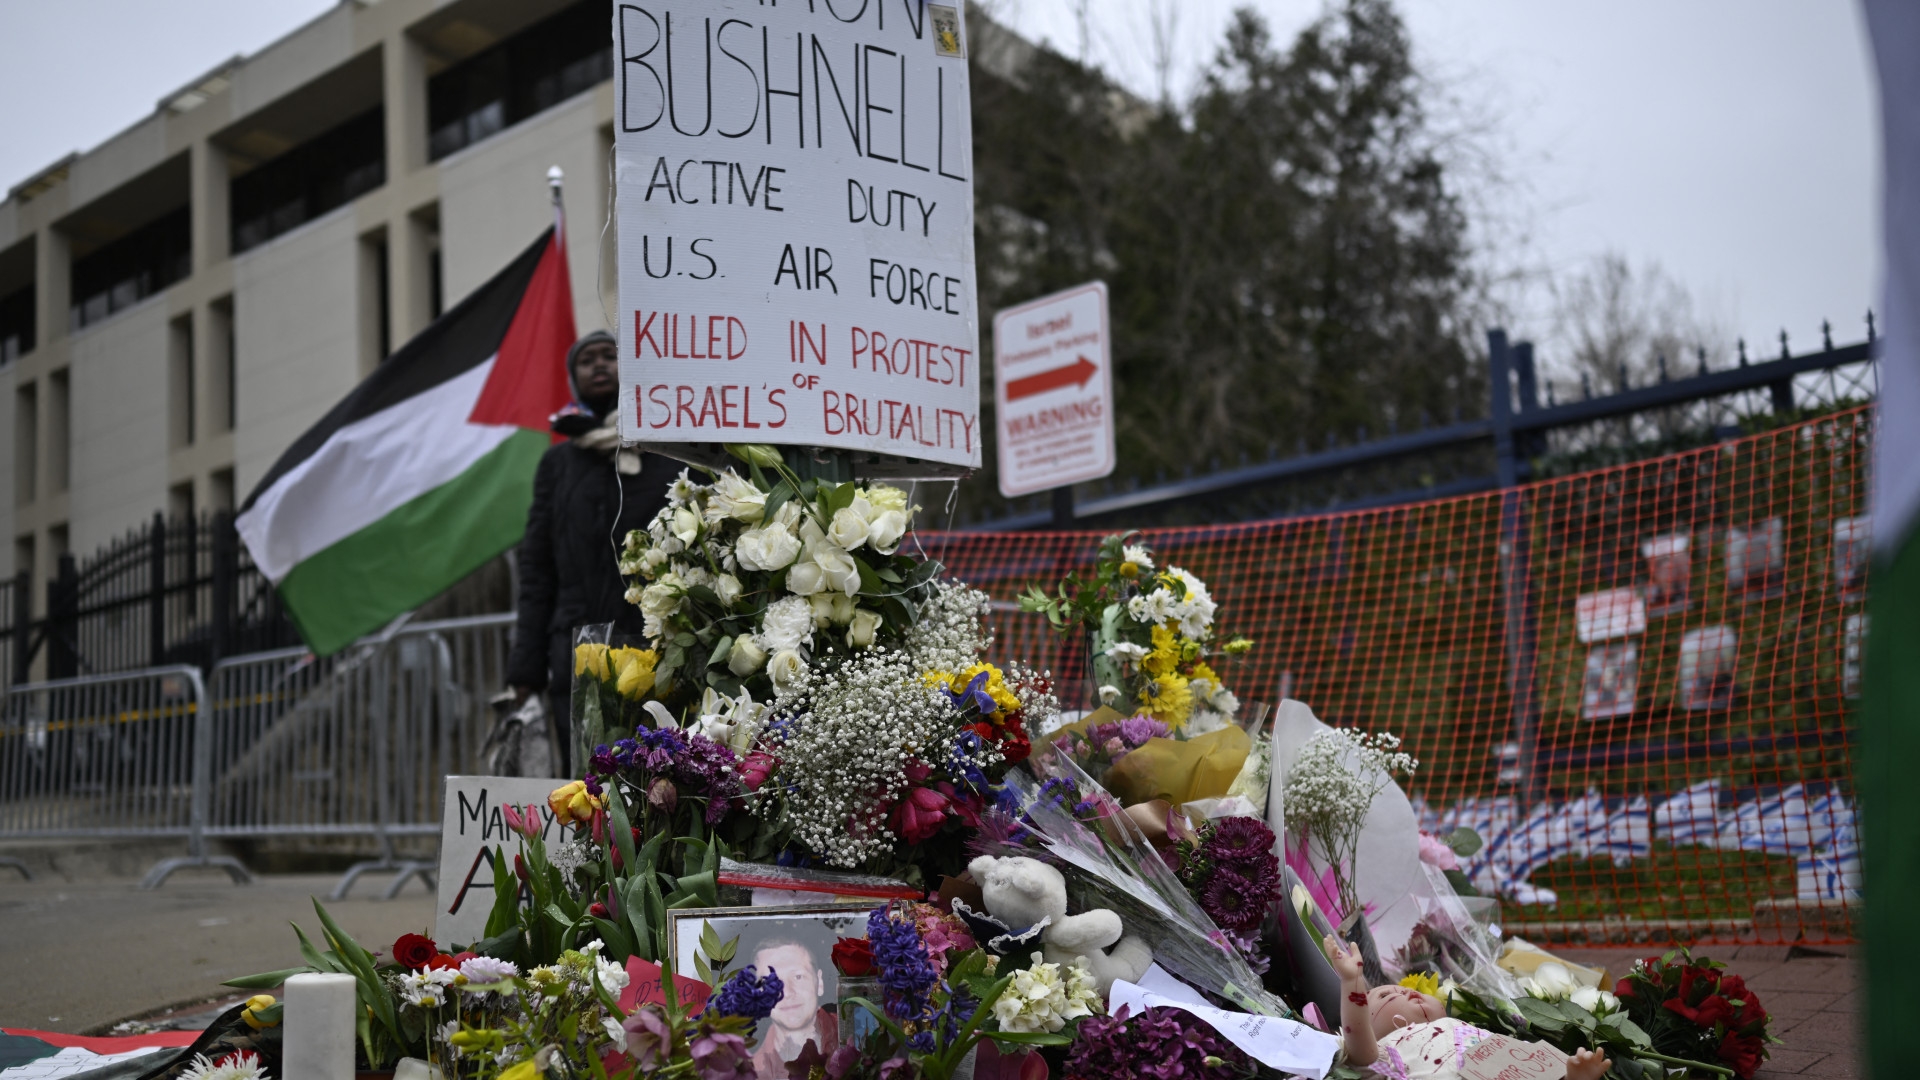 A memorial to Aaron Bushnell, a member of the US military who set himself on fire last weekend in protest of Israel's genocide in Gaza, is set up near the Israeli embassy in Washington, DC, on 2 March 2024 (Andrew Caballero-Reynolds/AFP)